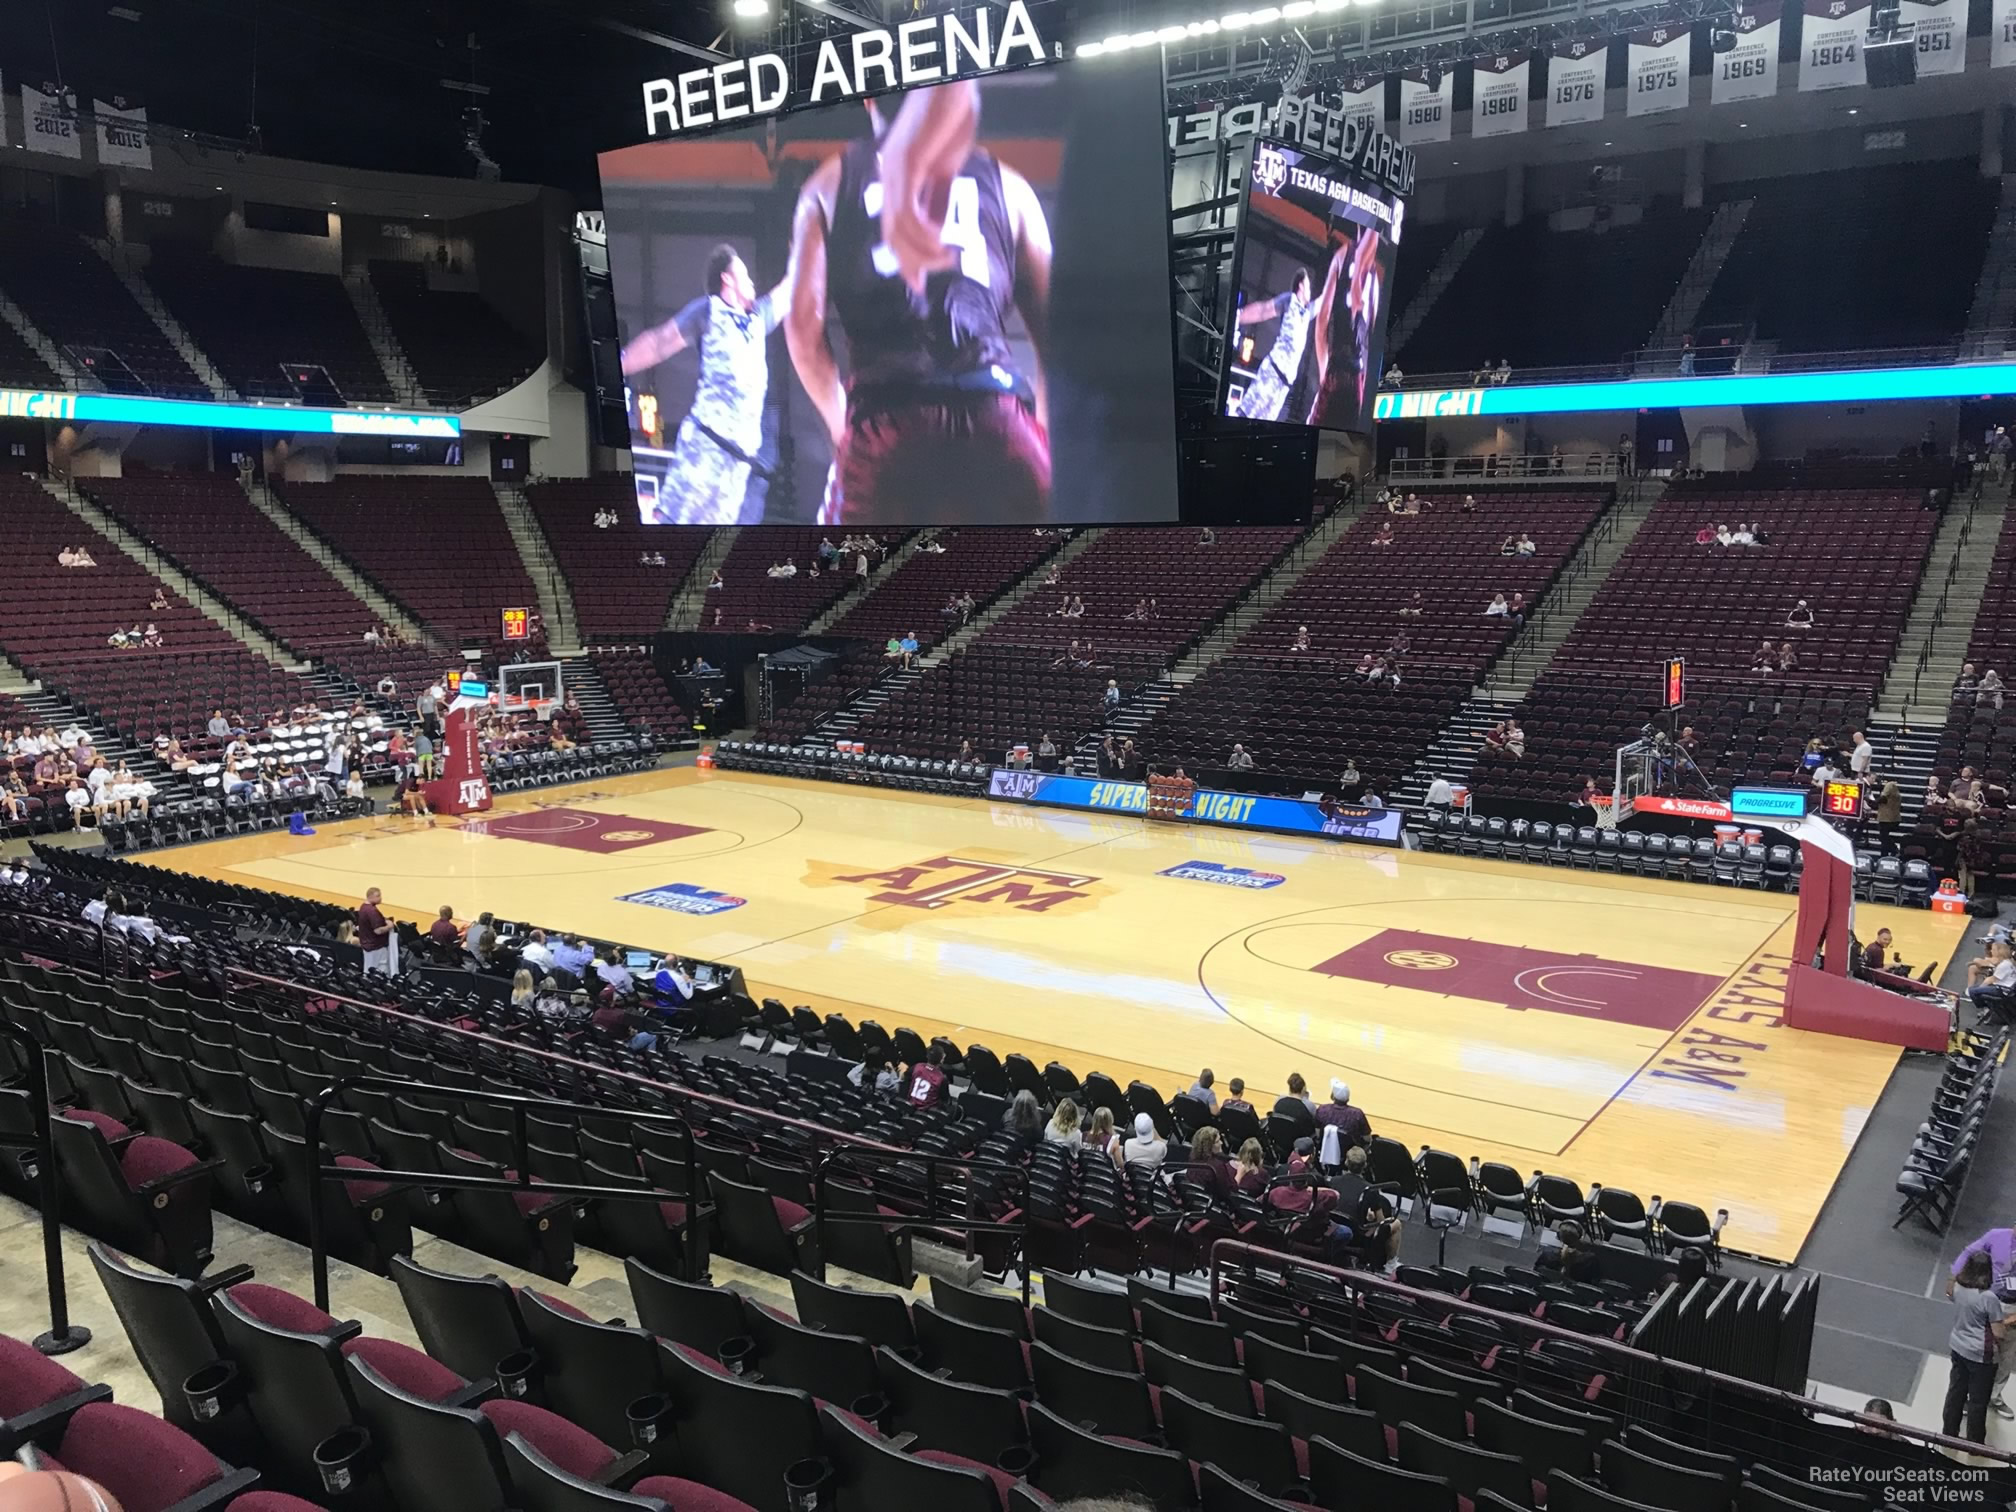 section 103, row j seat view  - reed arena